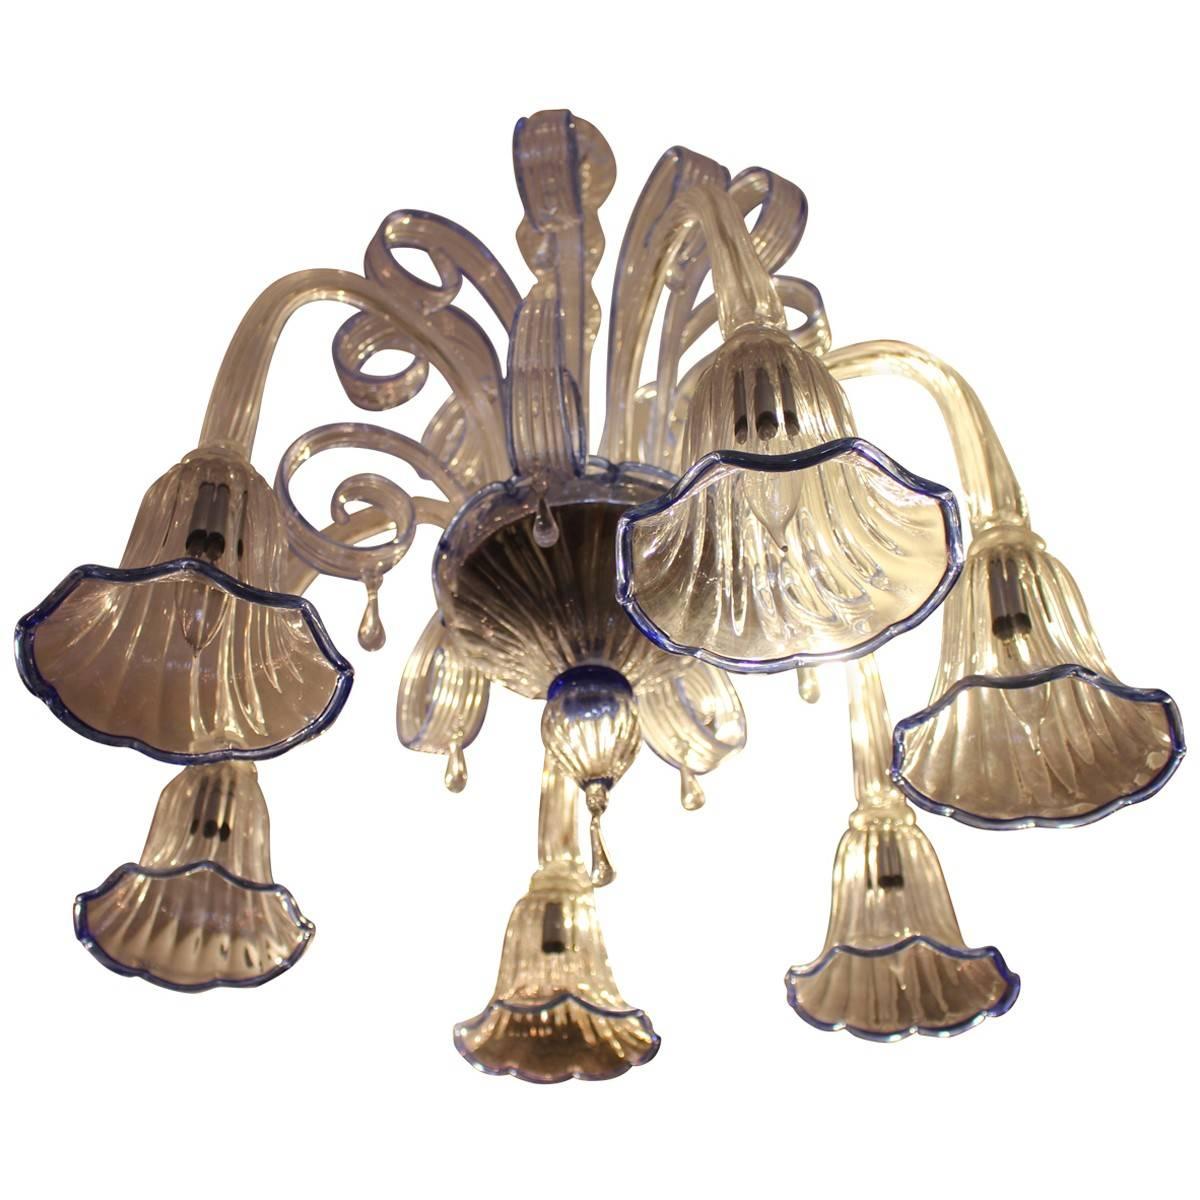 This stunning six-arm Murano glass chandelier has two tiers. The arms extend from the bottom tier upwards with the tulip tips extending downward. This Murano Chandelier will brighten up any space.